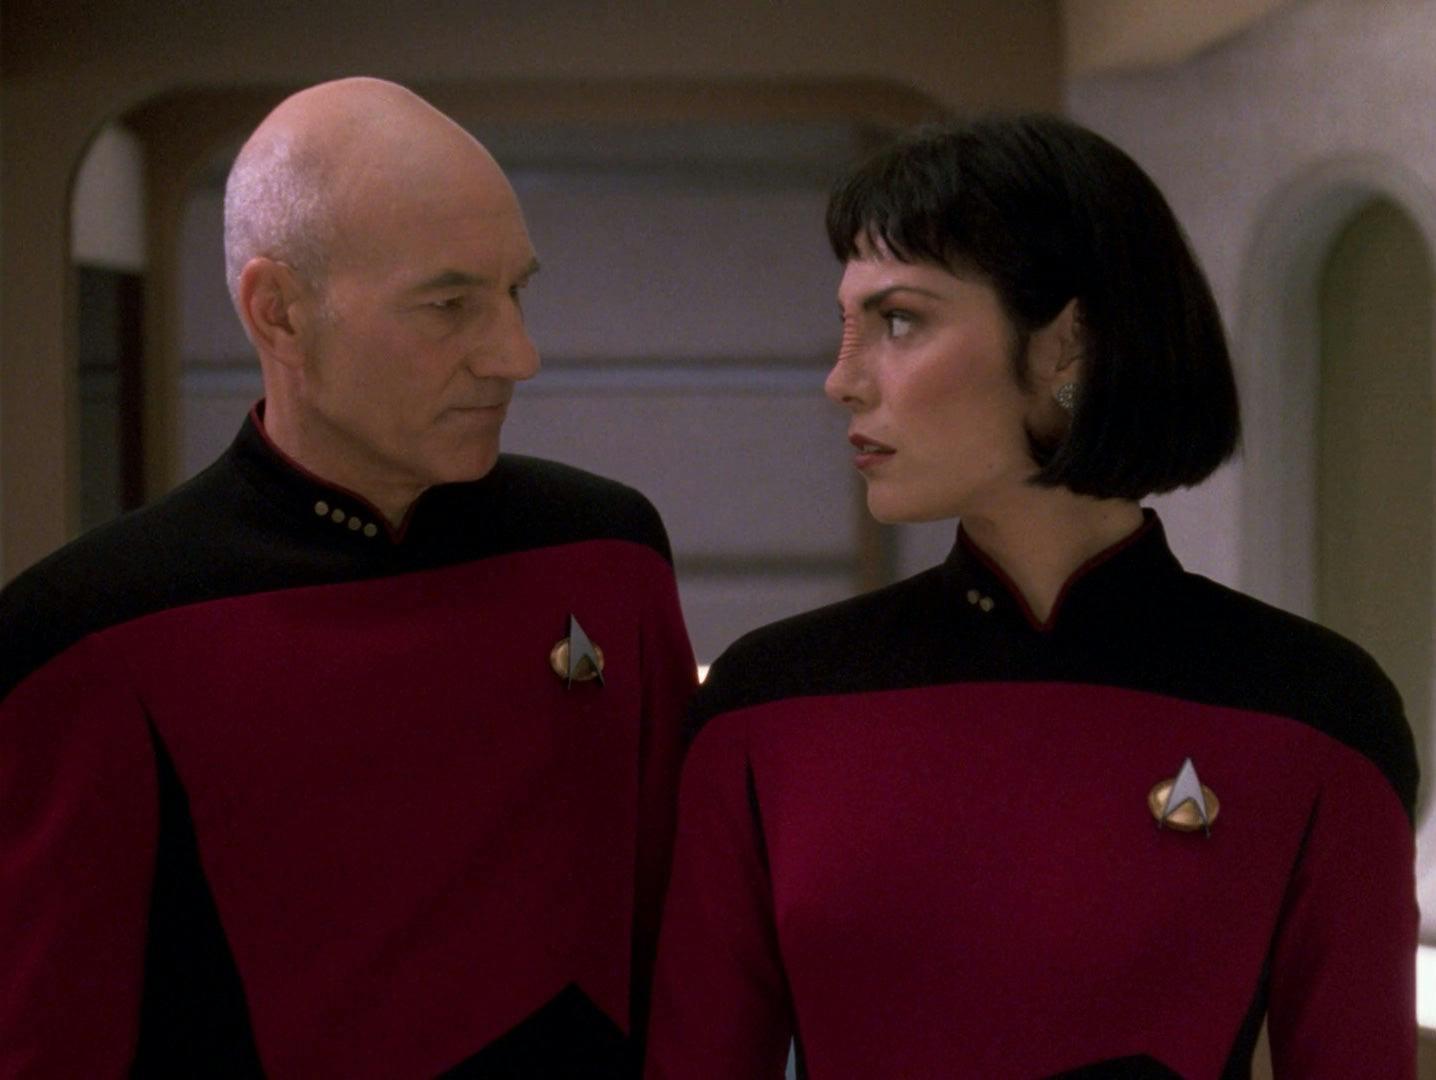 Captain Picard and Ensign Ro Laren stand side-by-side on Star Trek: The Next Generation